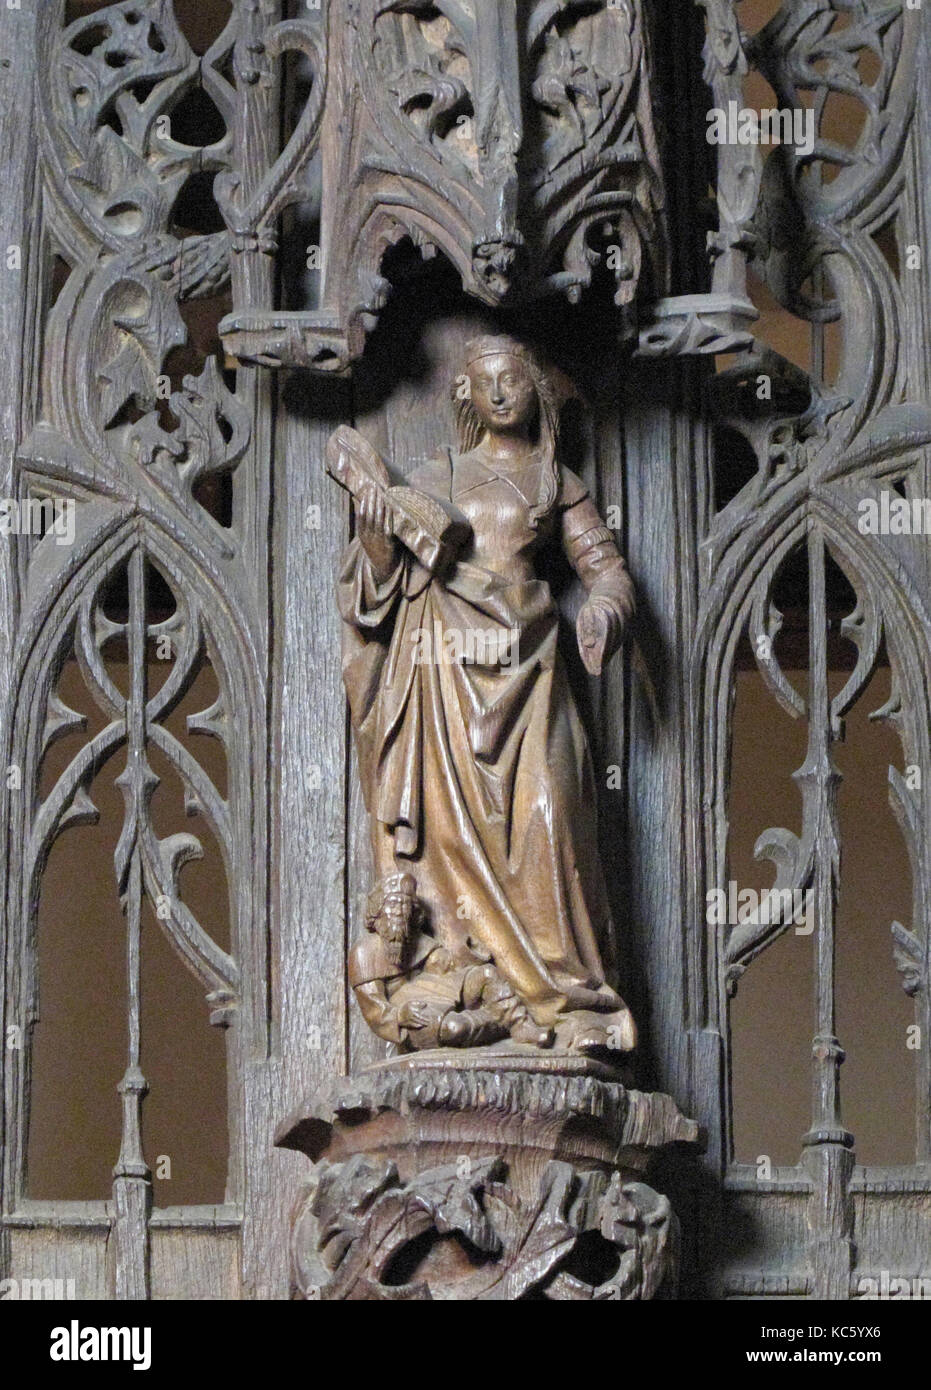 Saint Catherine, ca. 1500, North French, Walnut, Overall: 13 7/16 in. (34.2 cm), Sculpture-Wood Stock Photo